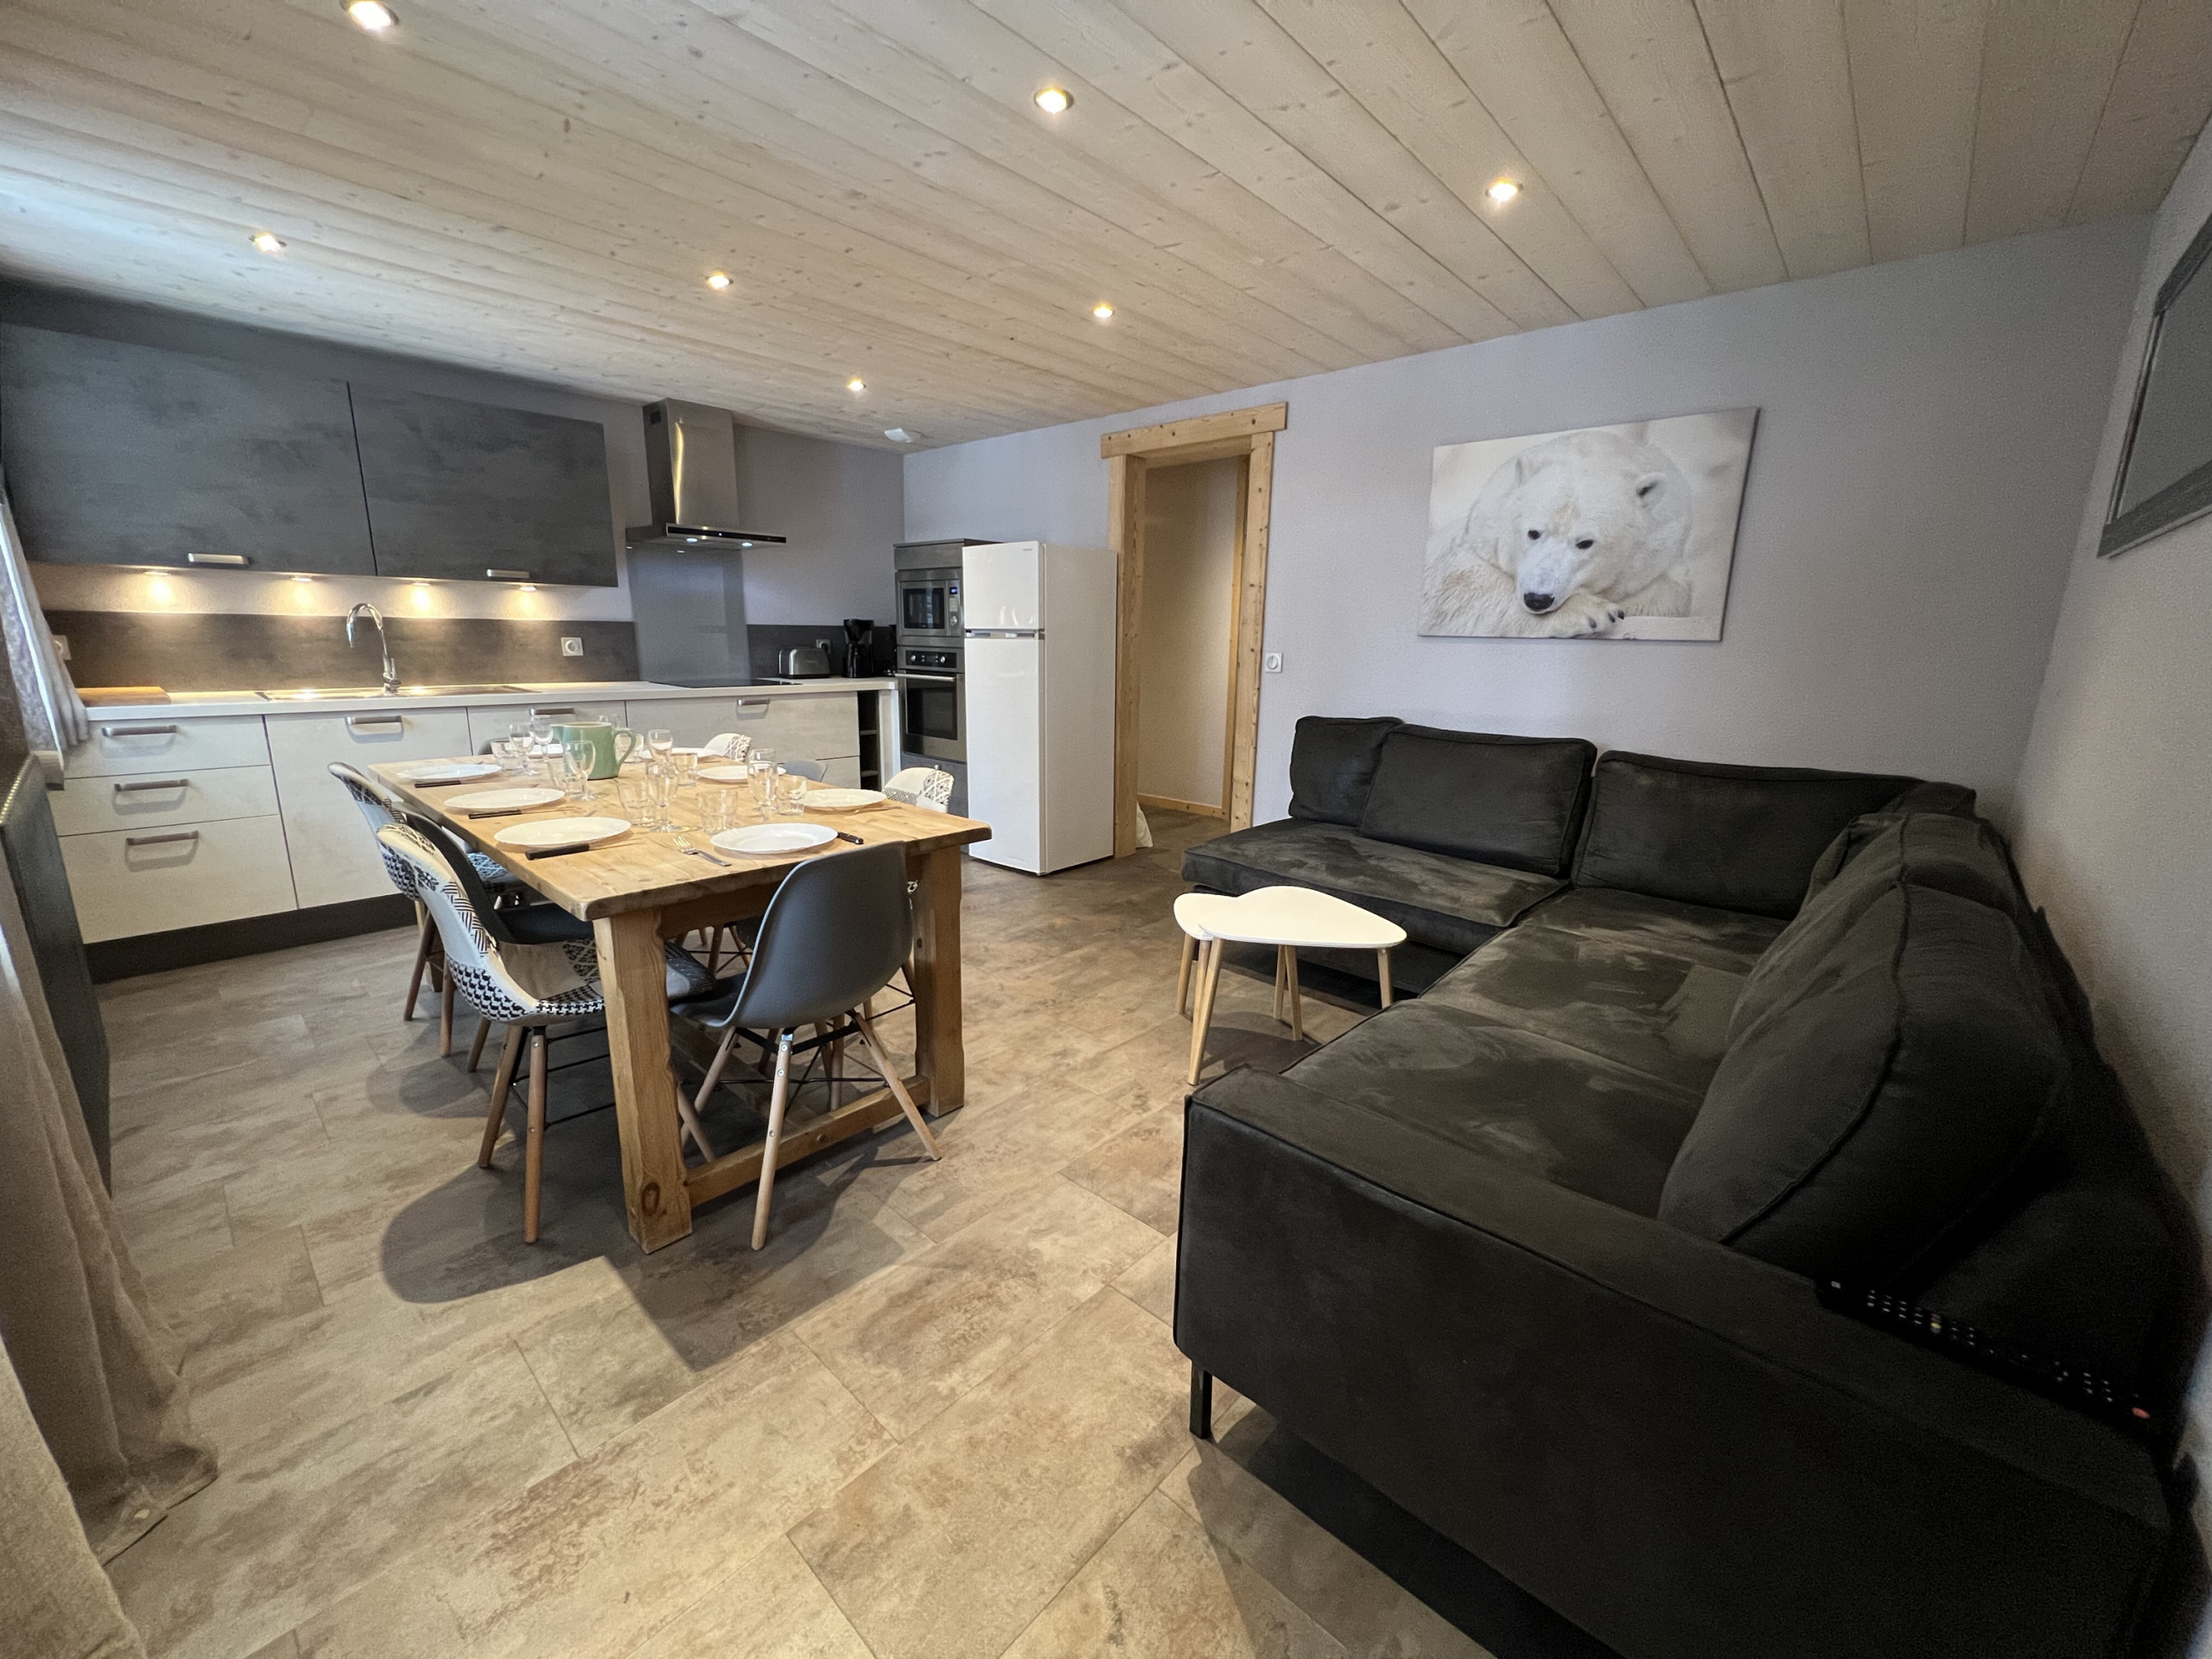  in La Clusaz - Gentianes flat 2 - Apartment for 8 people 3* in the village, near ski slope